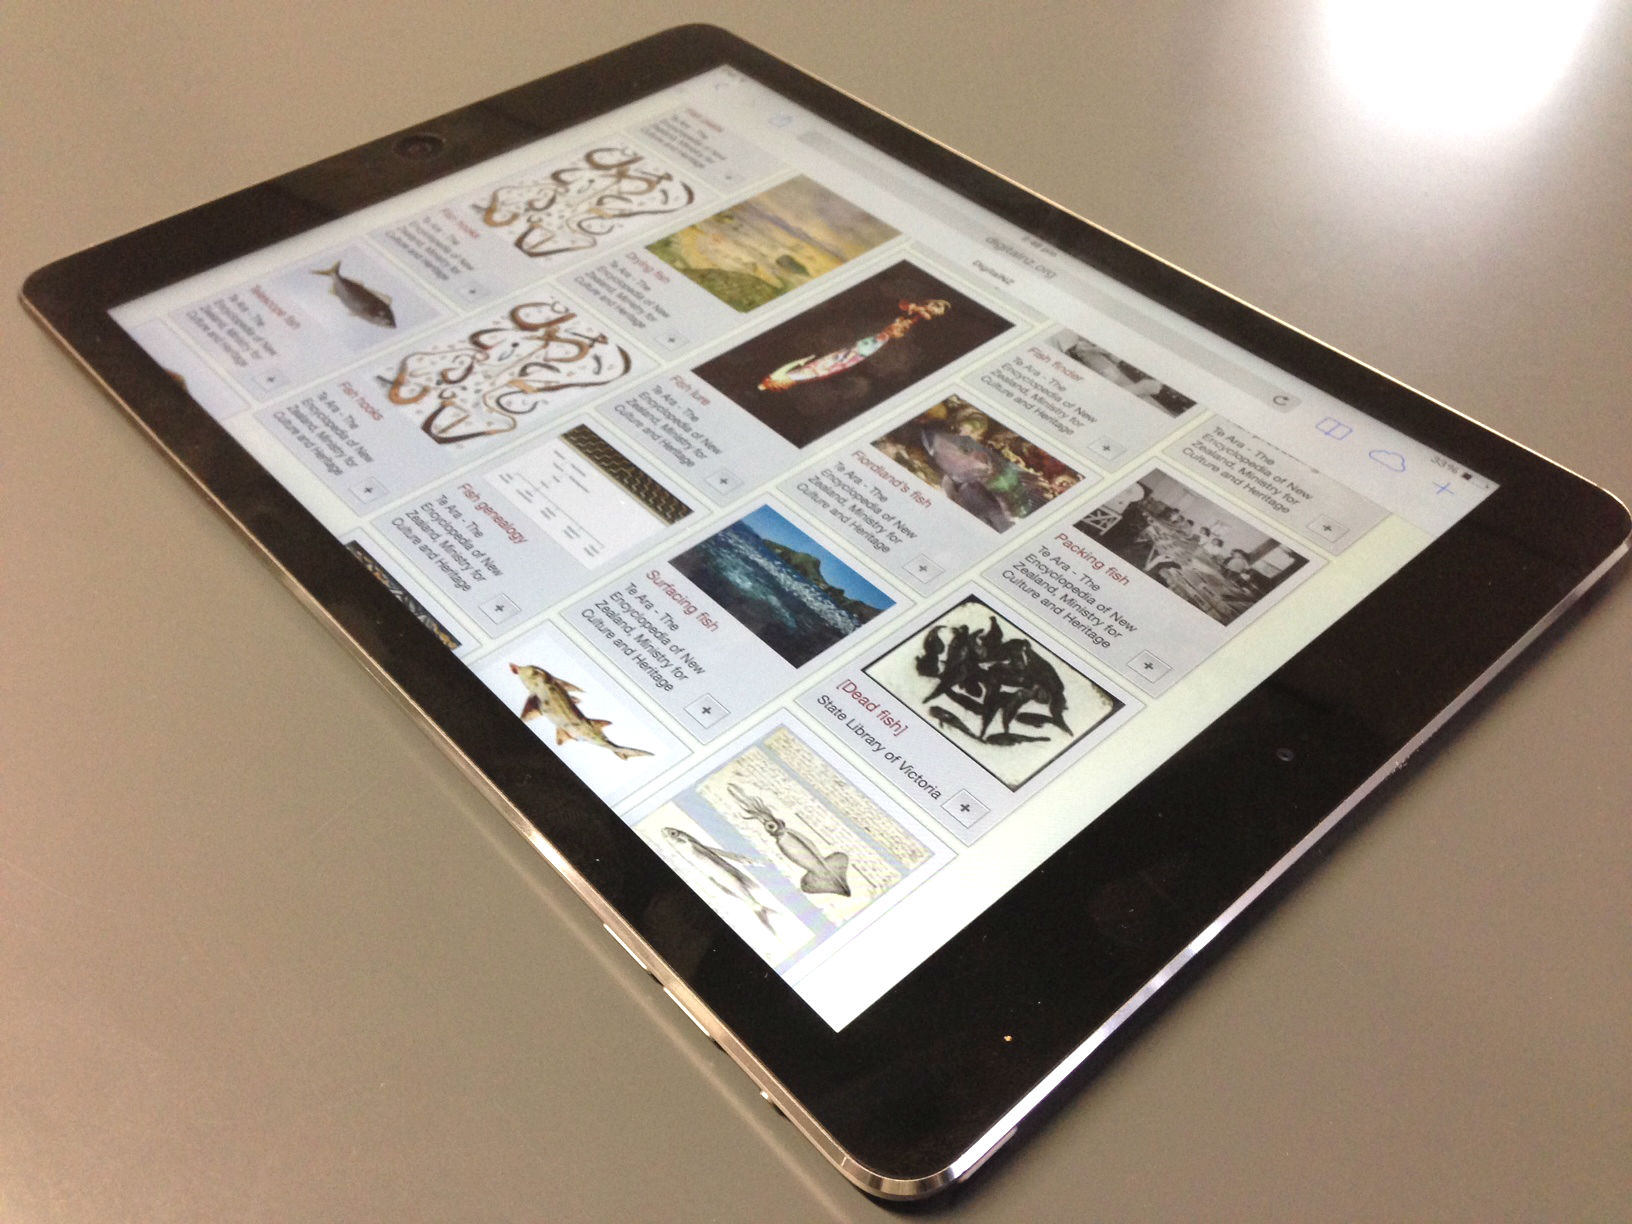 An iPad with showing the DigitalNZ website.